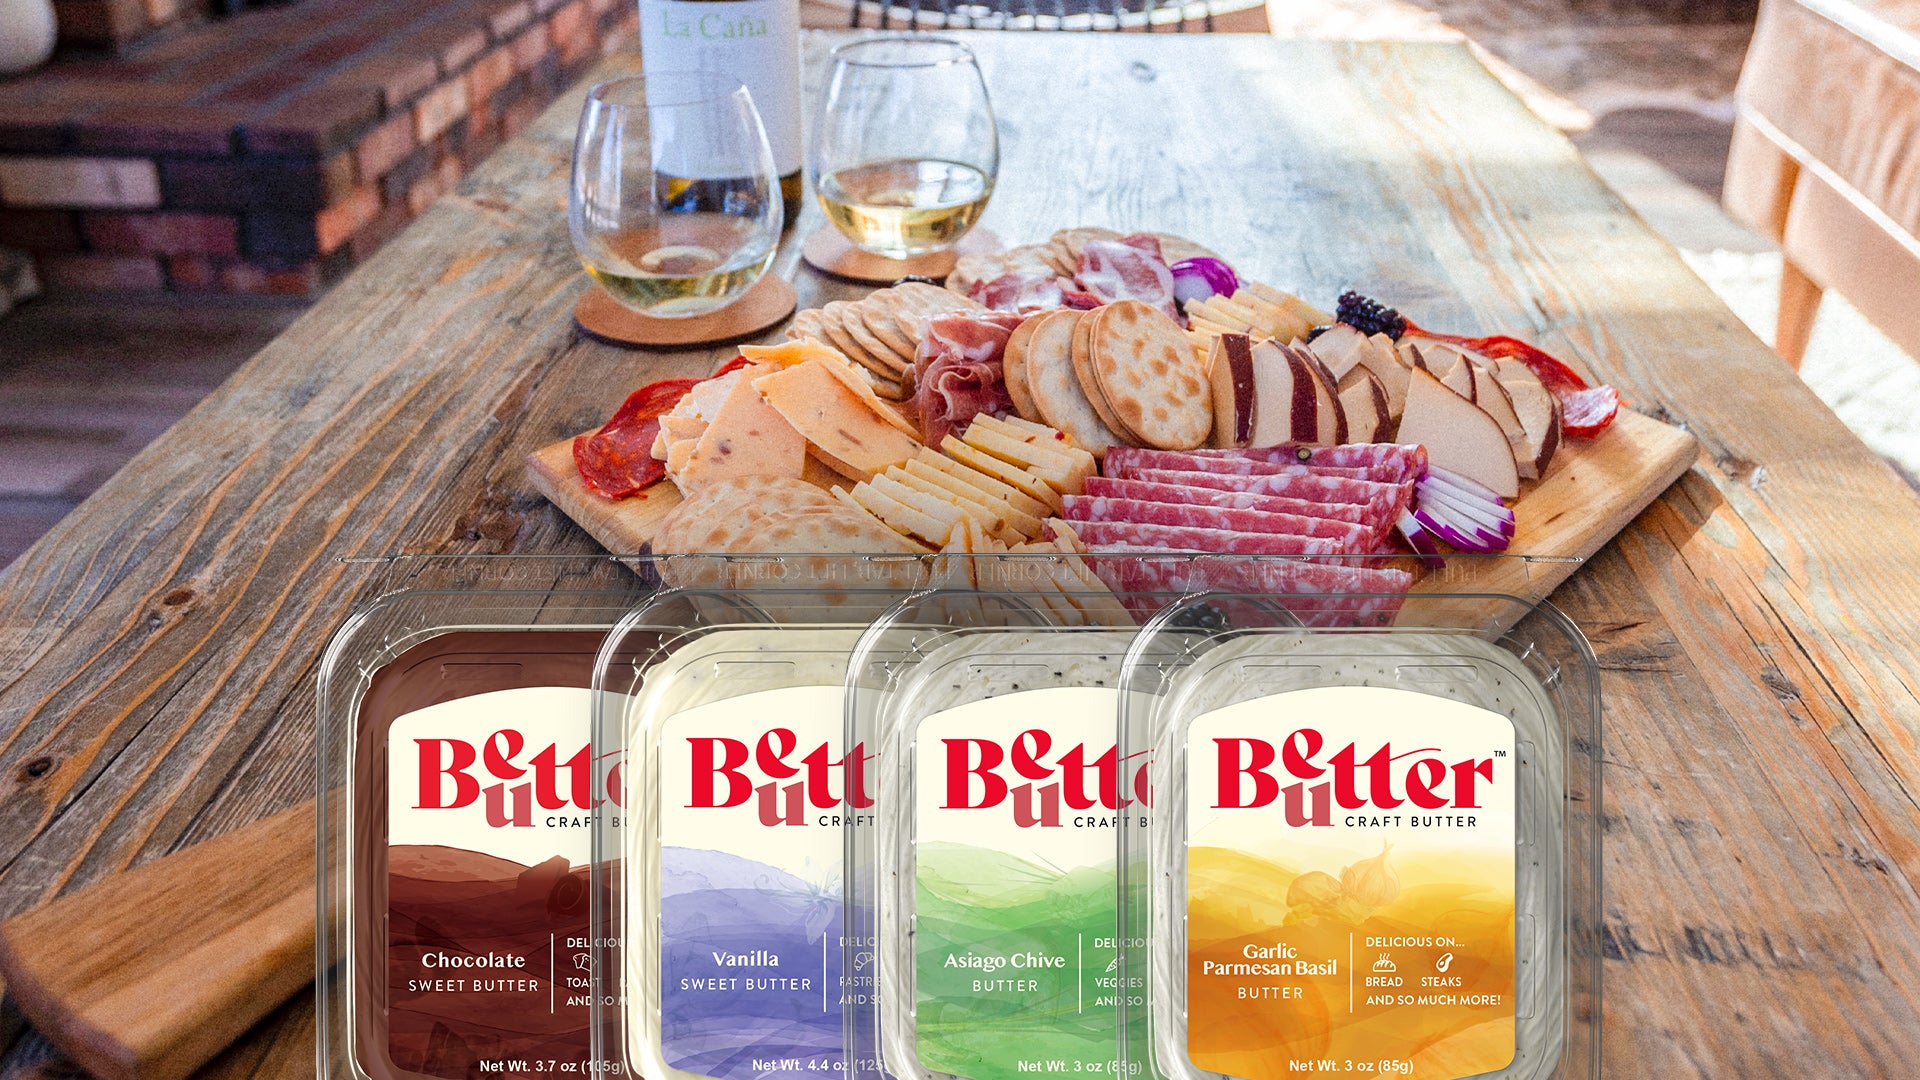 Pairing Craft Butter to Charcuterie Boards